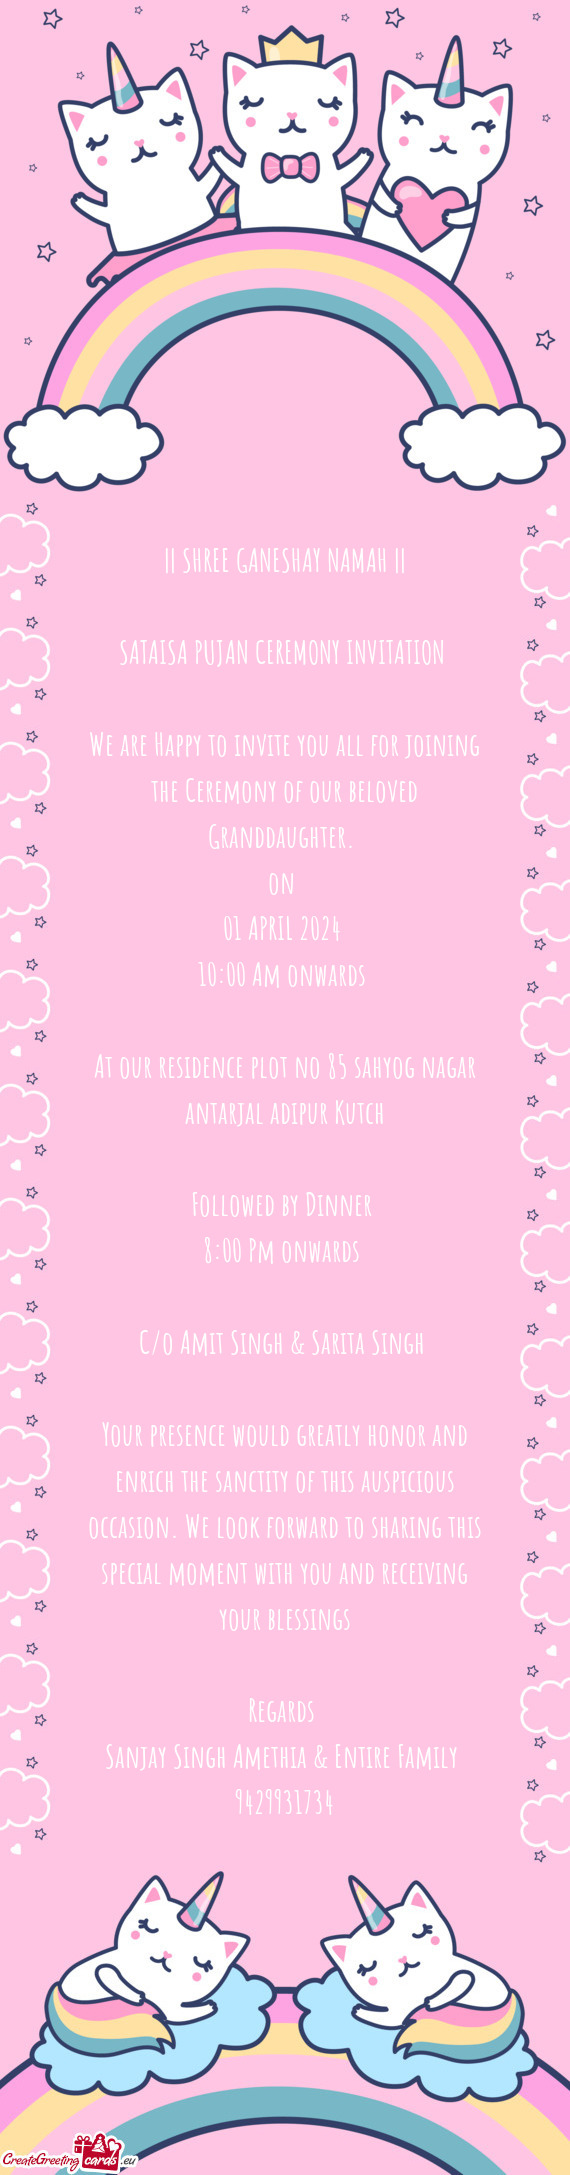 We are Happy to invite you all for joining the Ceremony of our beloved Granddaughter